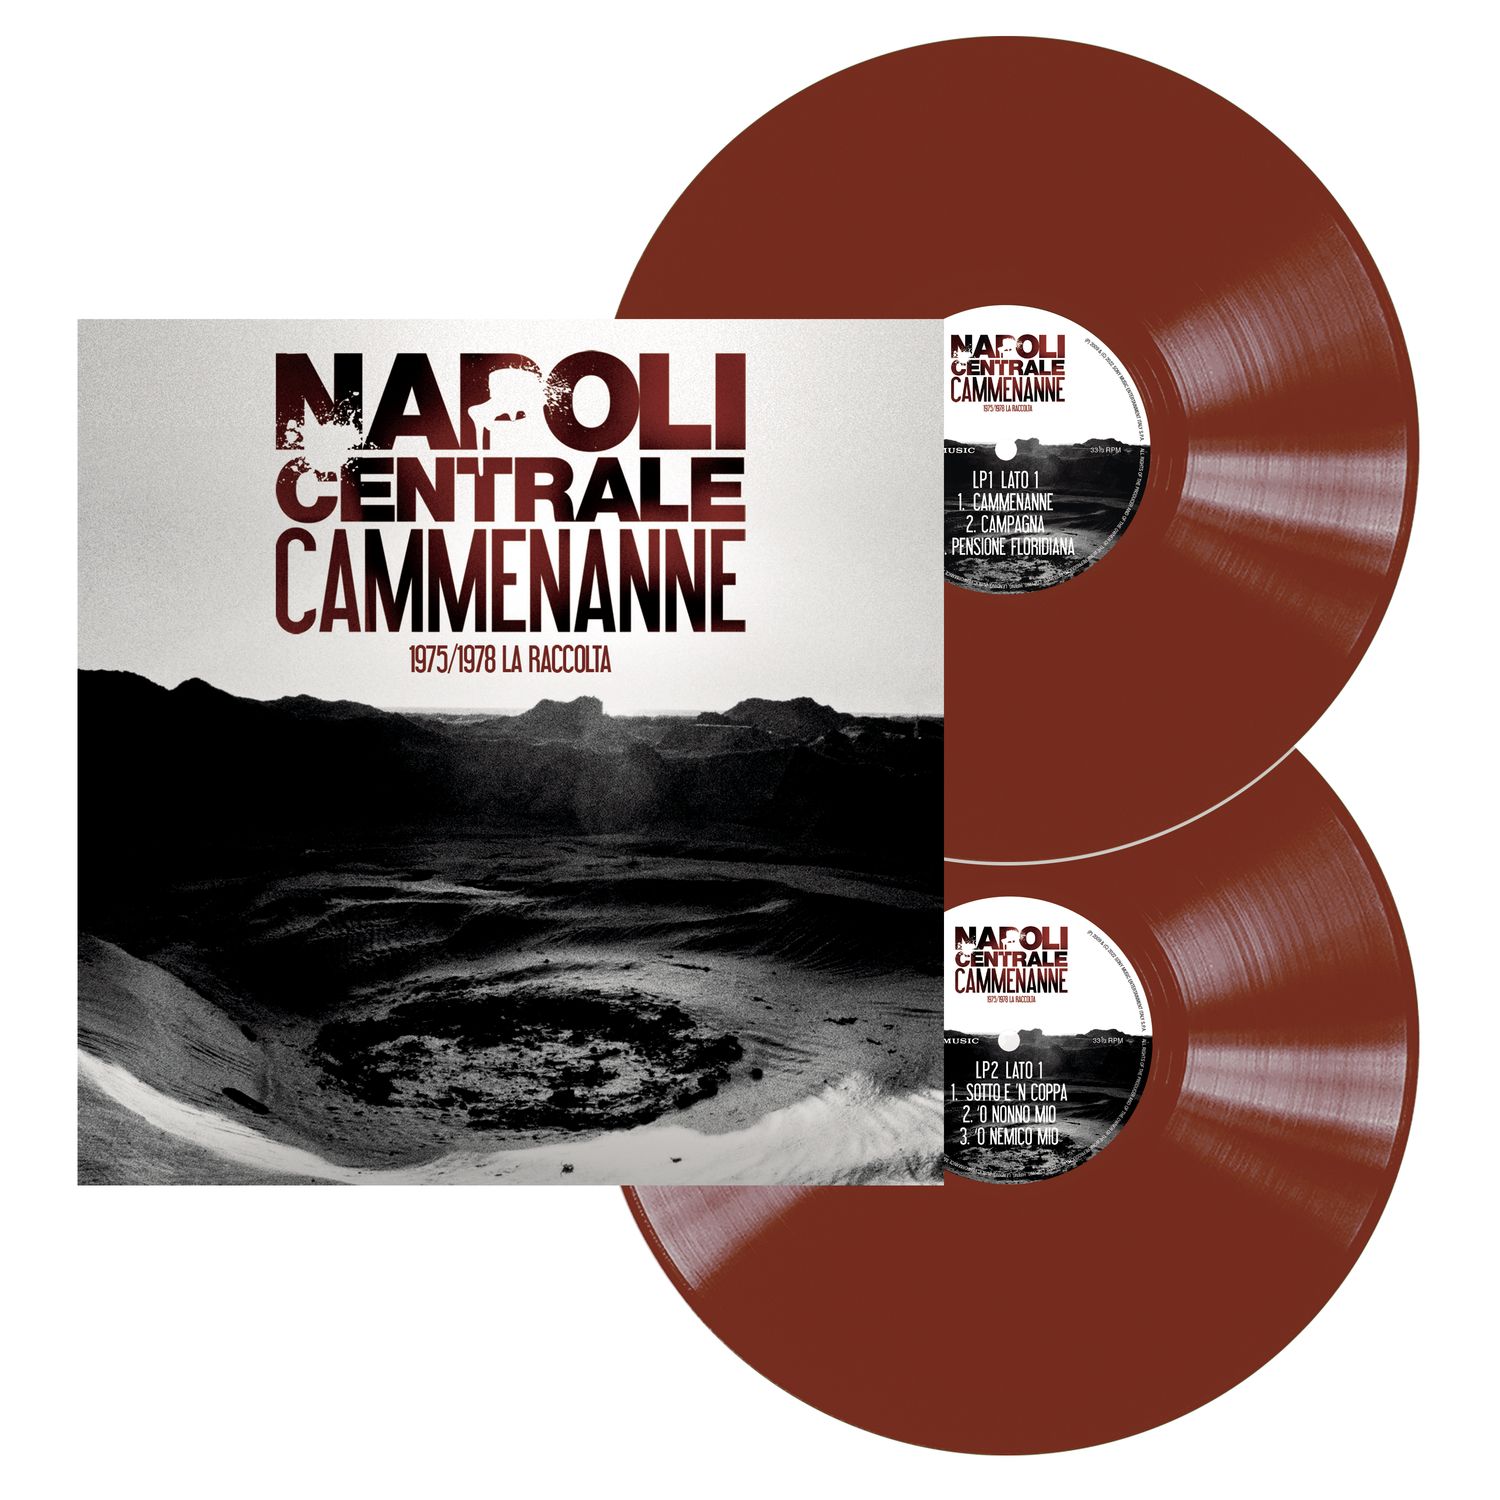 CAMMENANNE (180 GR LIMITED NUMBERED BROWN VINYL EDITION)